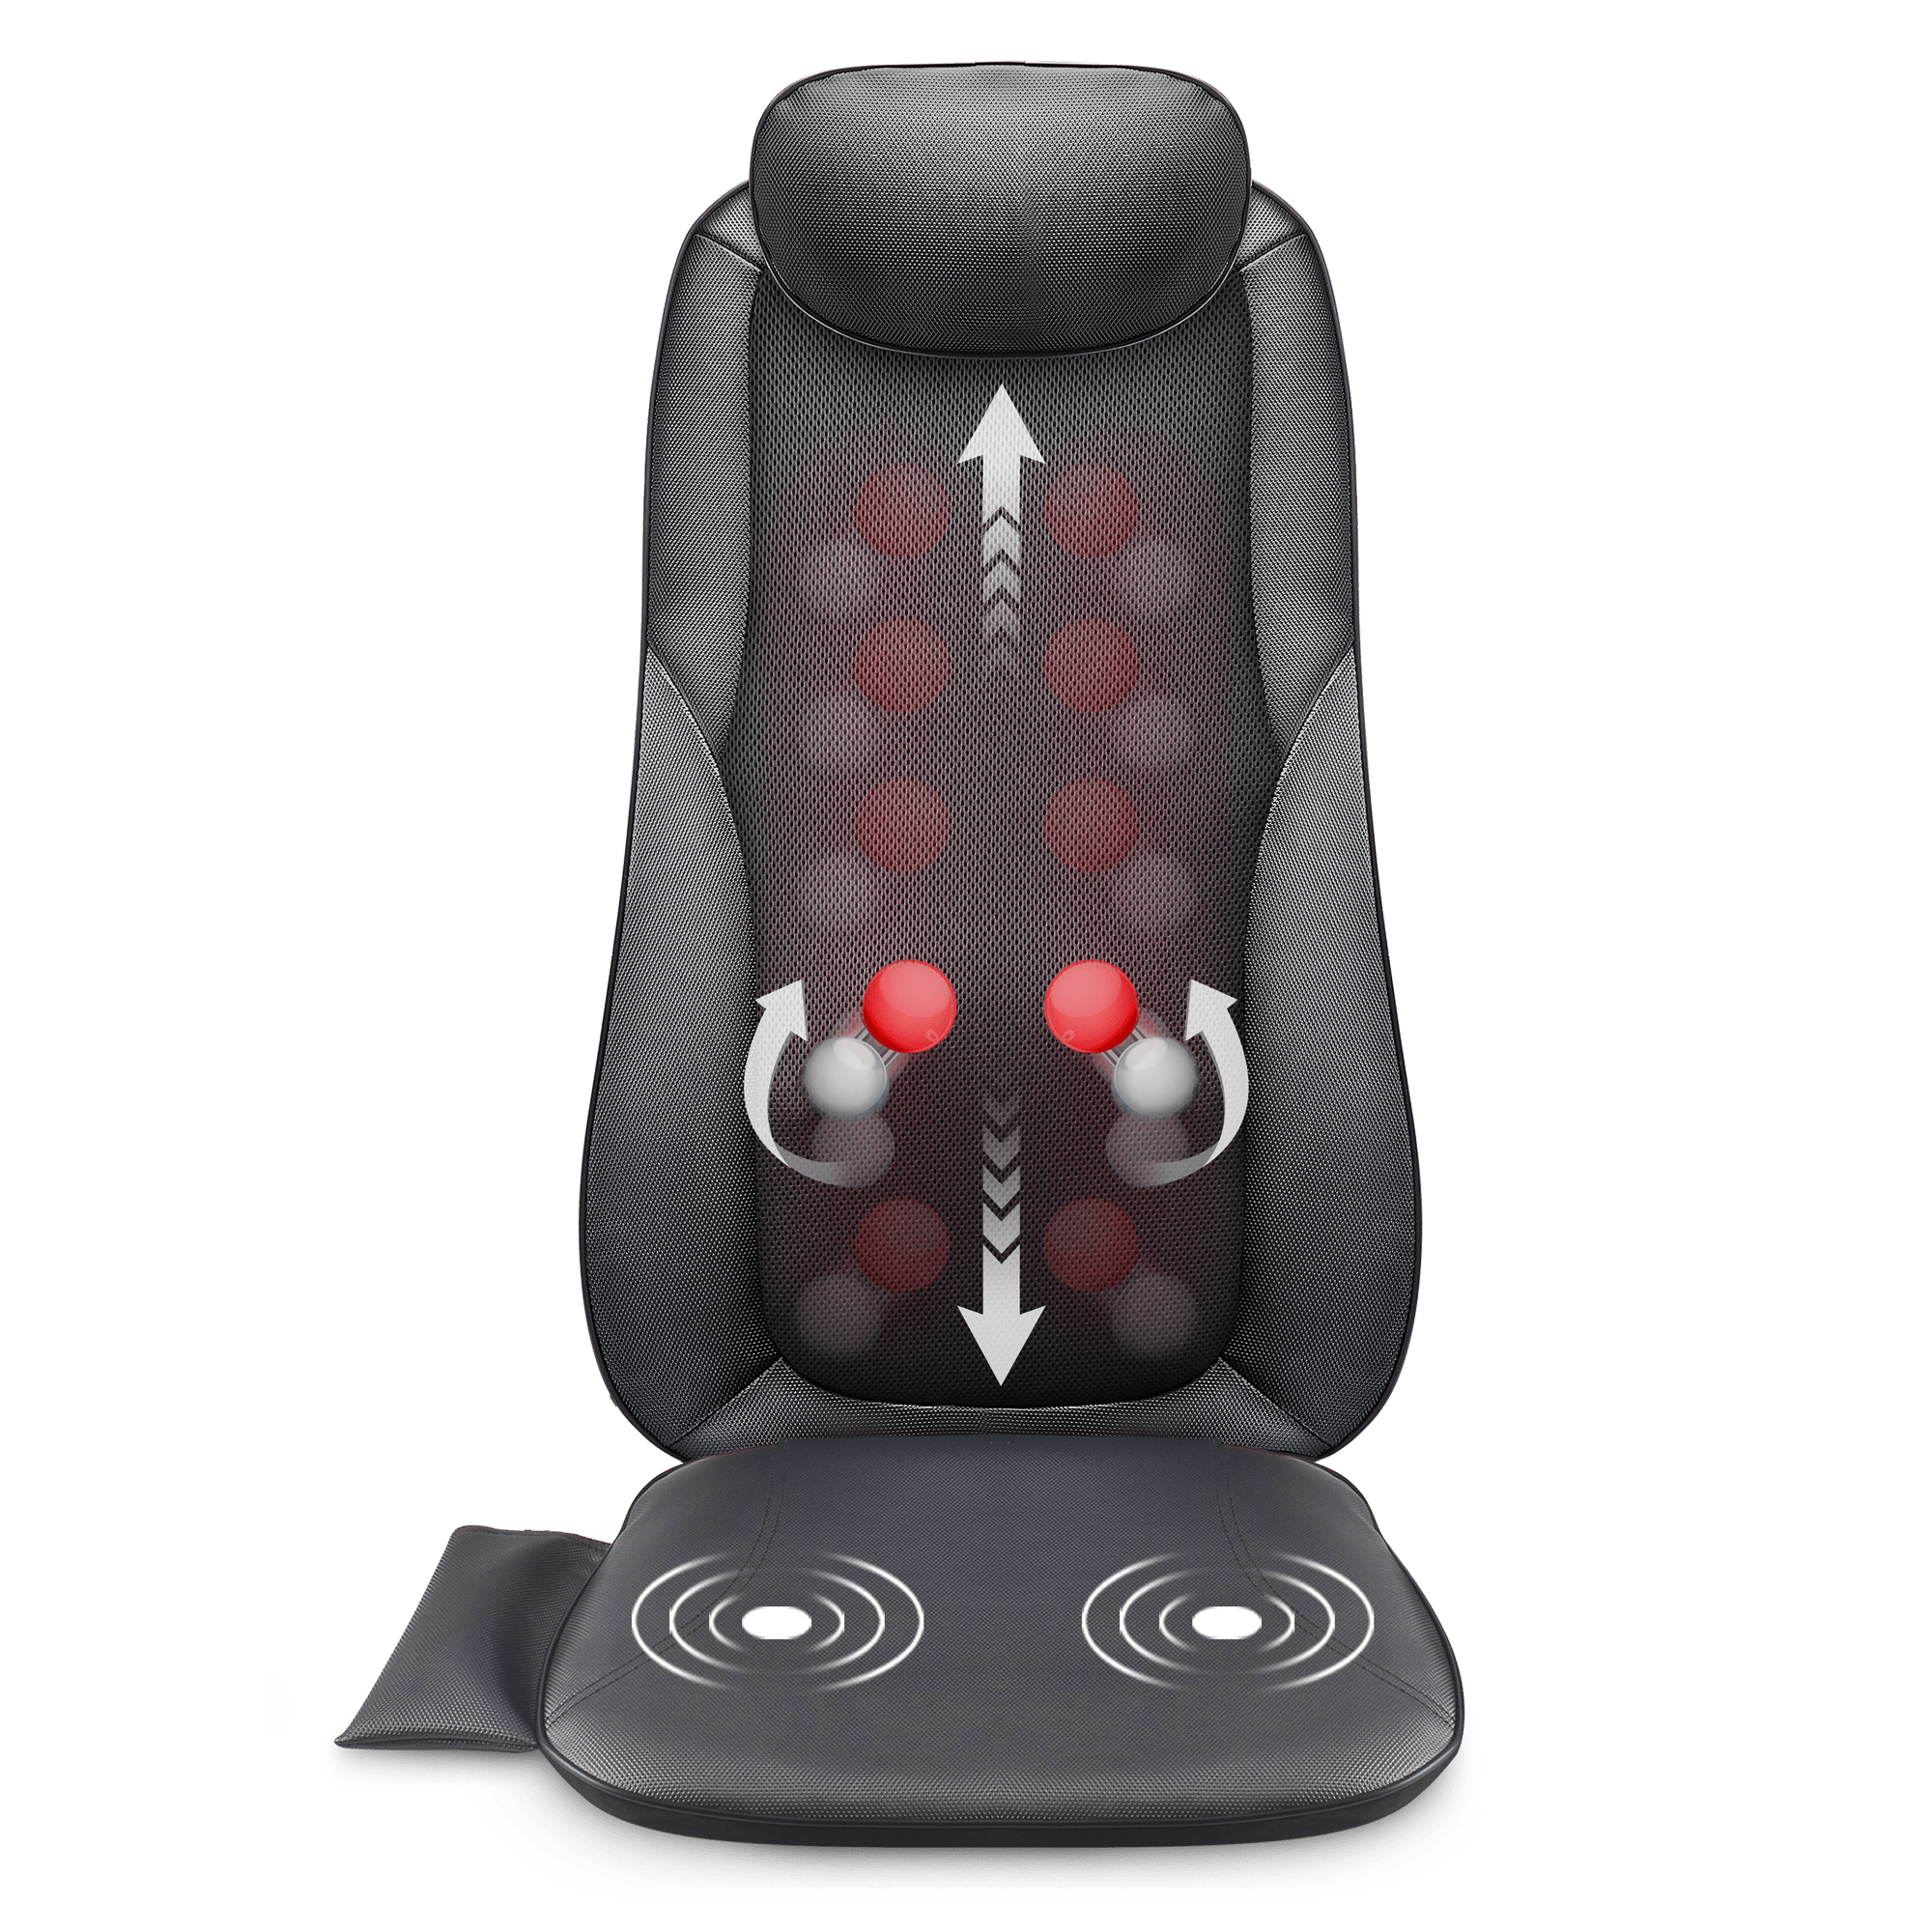 Snailax Shiatsu Neck and Back Massager with Heat, Deep Kneading Massage Chair  Pad, Seat Cushion Massager with Gel, Gifts 